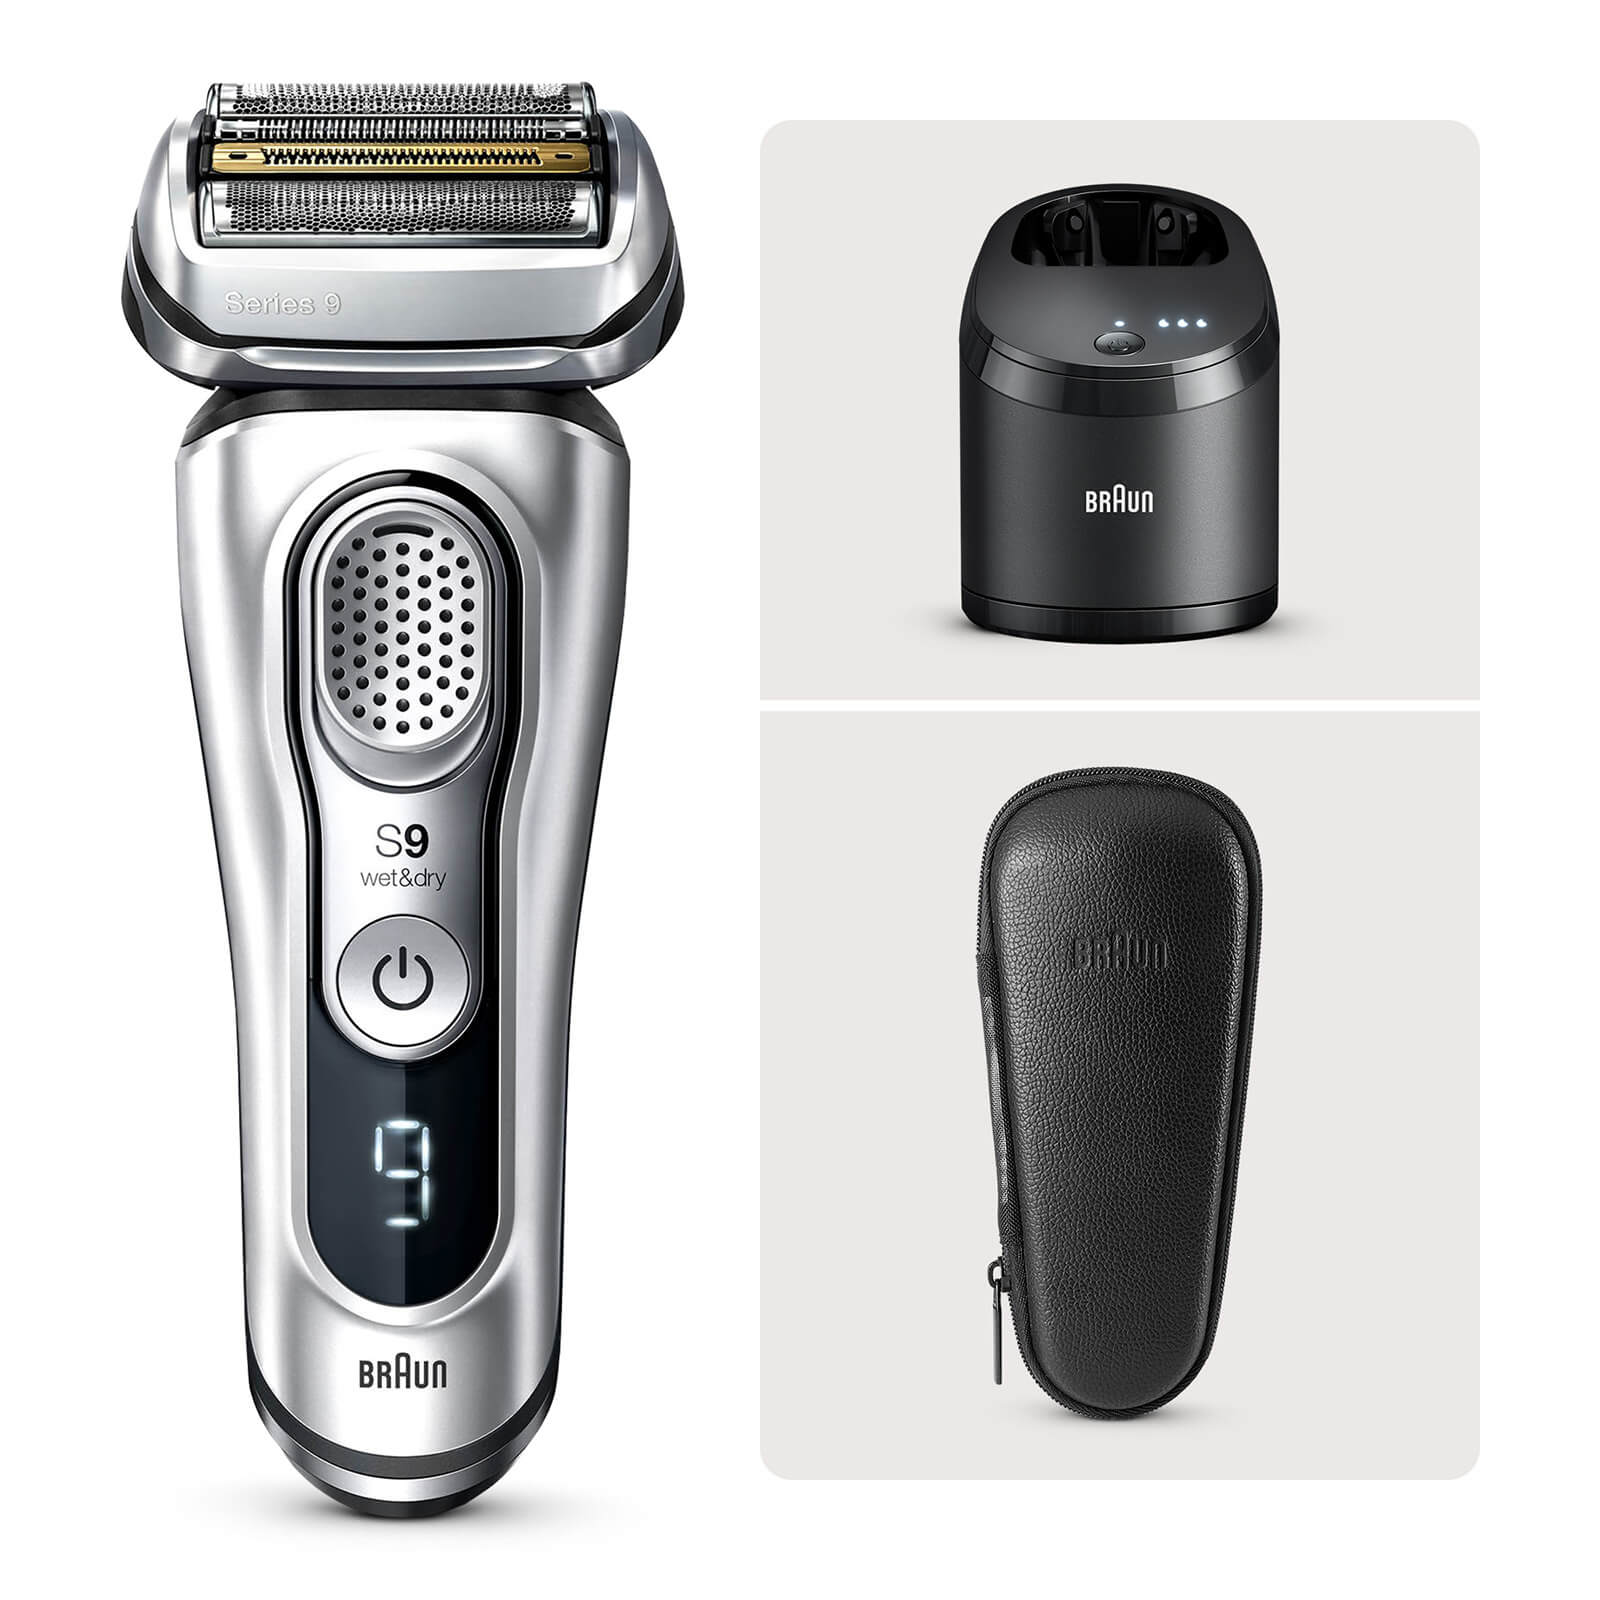 Braun Series 9 9385cc Electric Shaver with Cleaning Centre - Silver